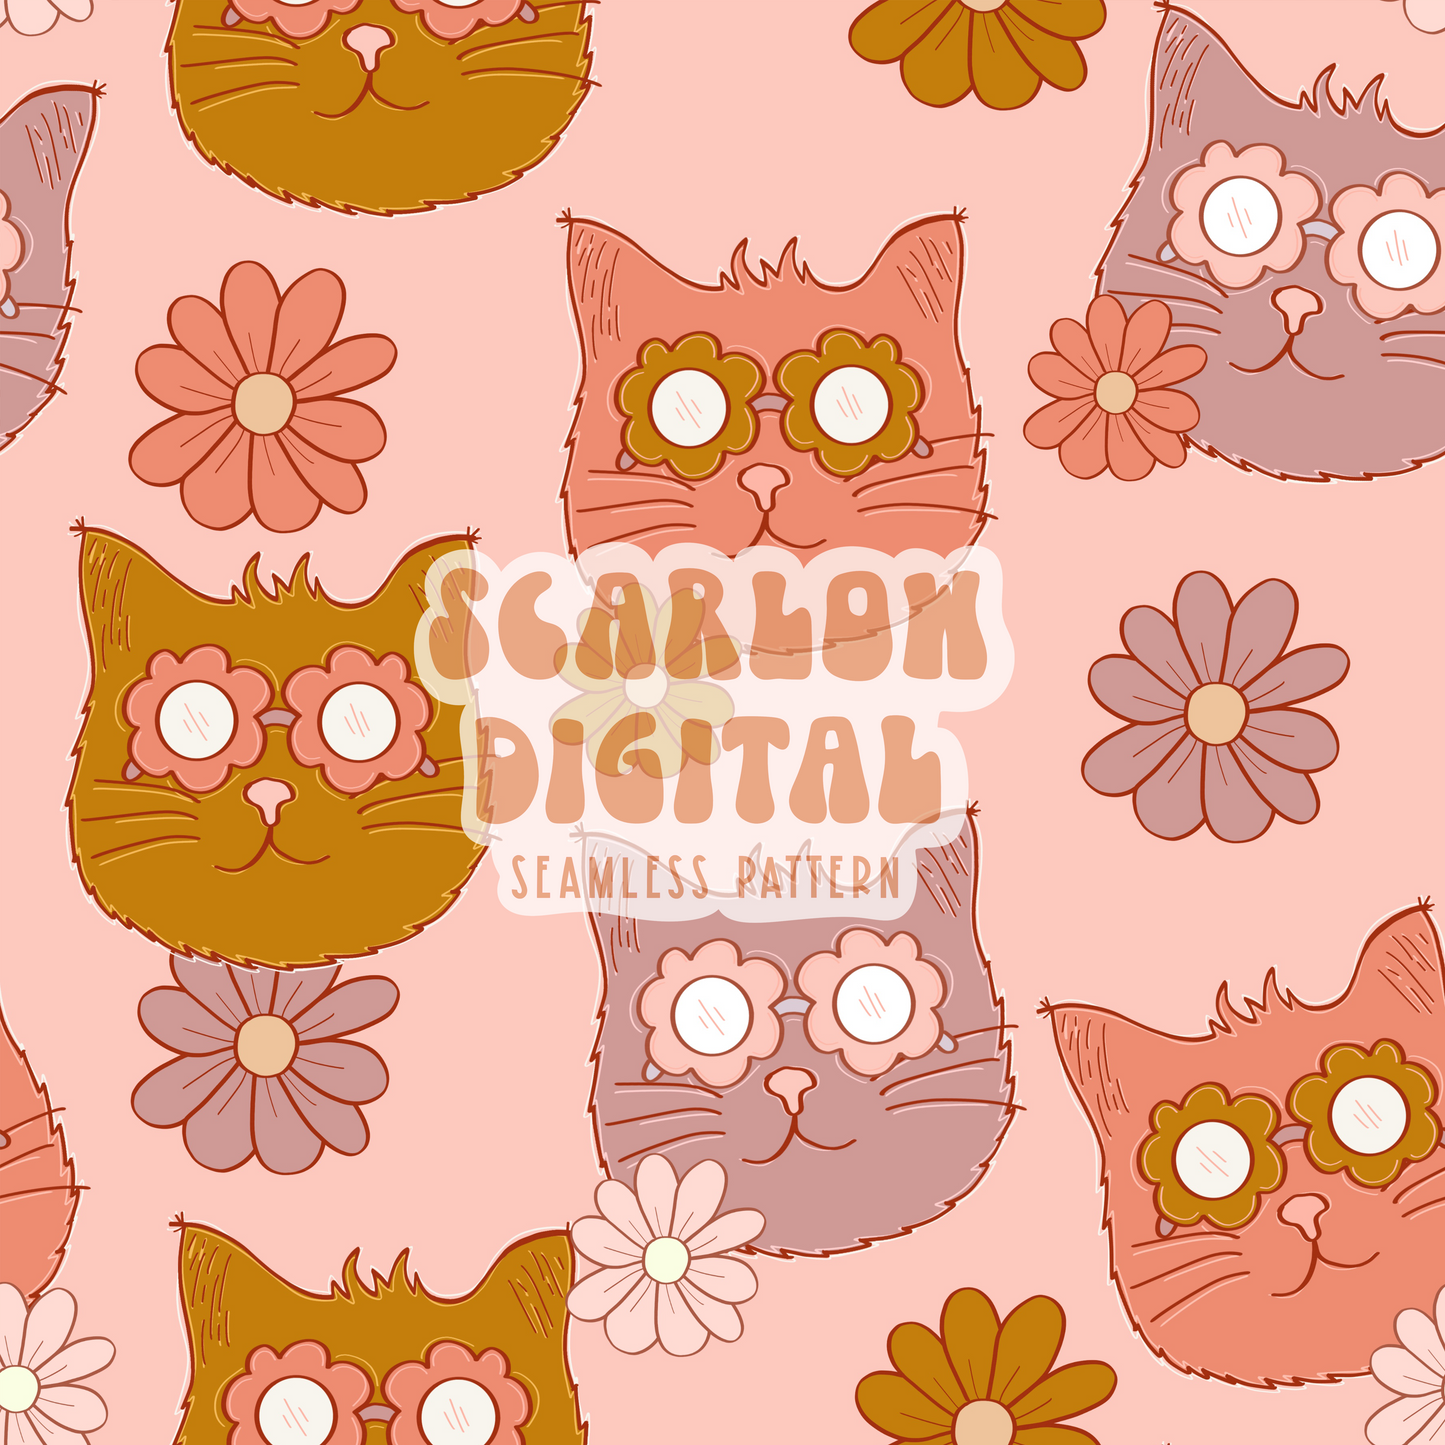 Cats Seamless Pattern-Retro Sublimation Digital Design Download-cool cat seamless pattern, cat mama seamless file, cat lovers sublimation